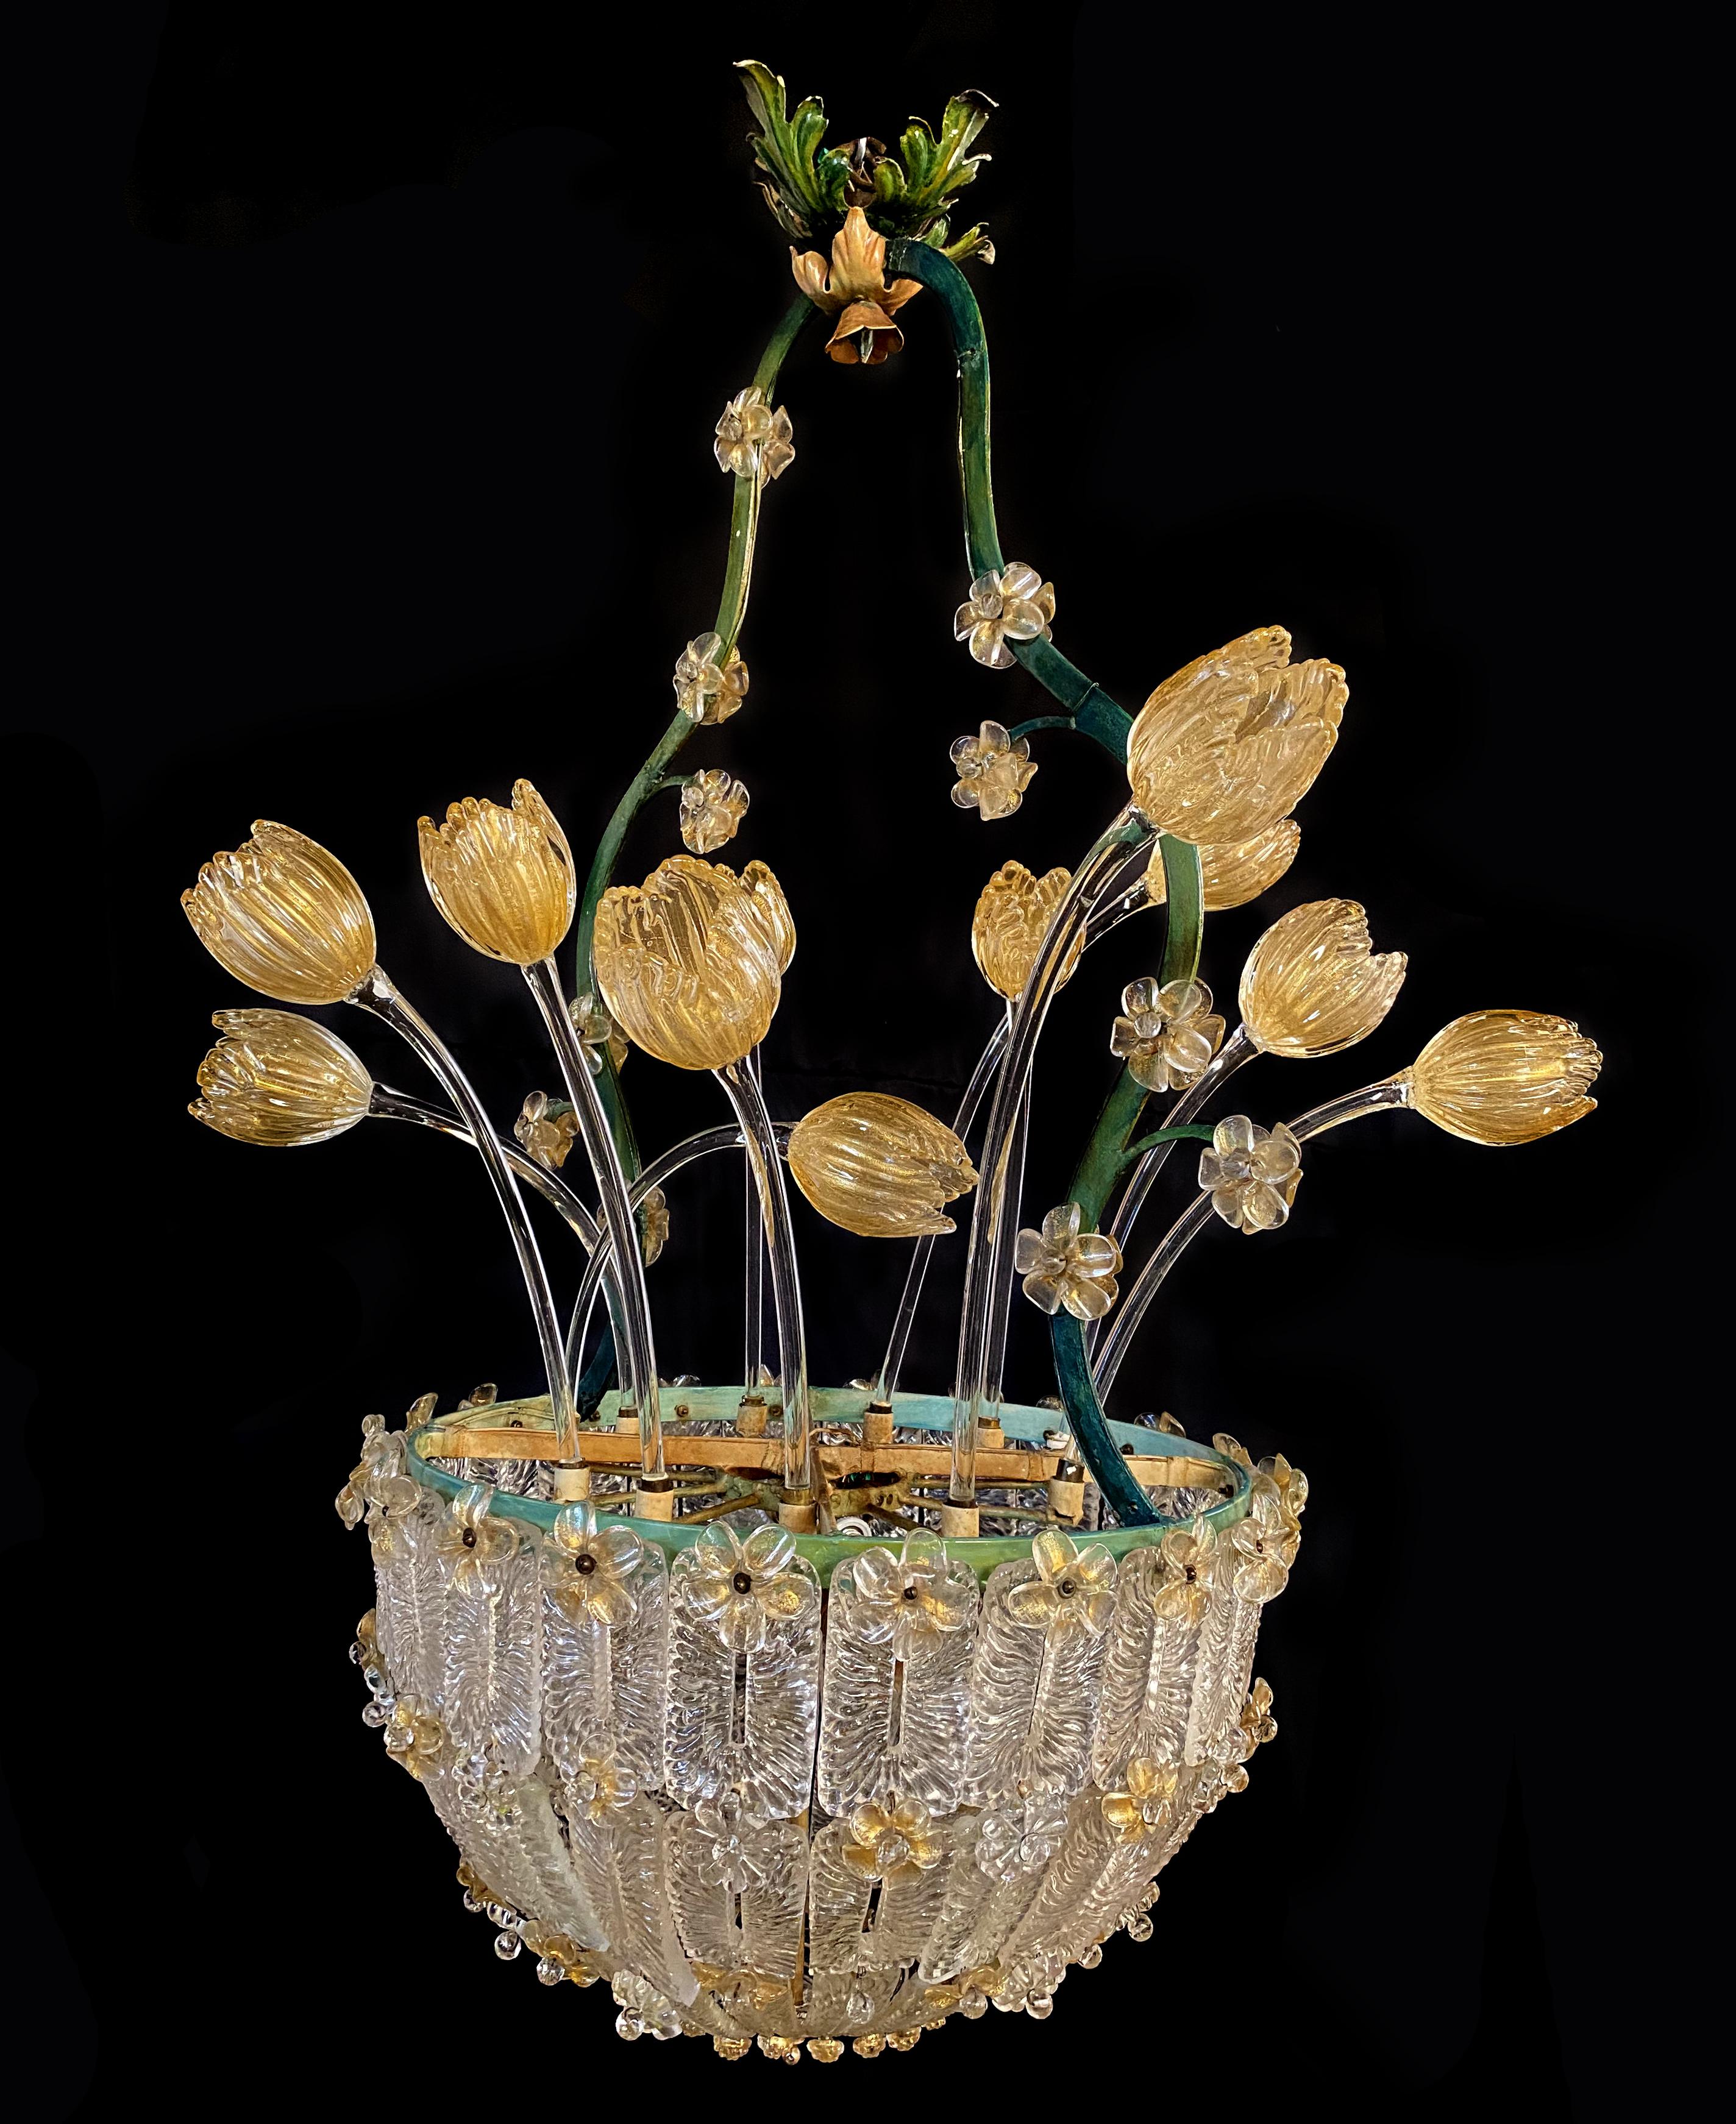 Murano Glass Amazing Glass Flower Chandelier with Gold Inclusions, Murano, 1950s For Sale